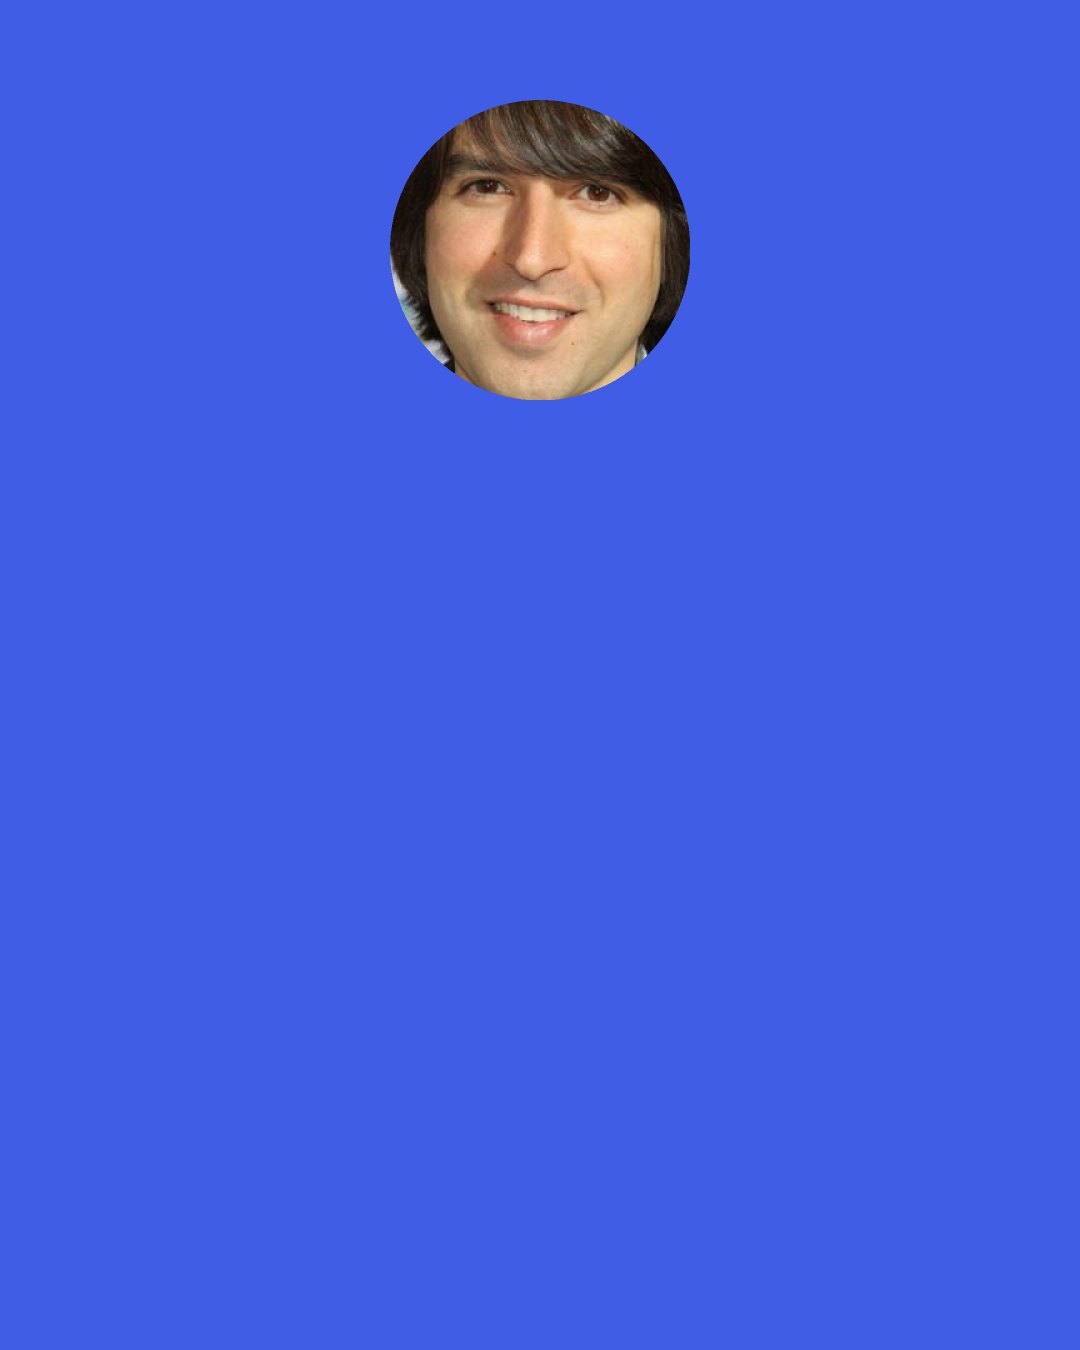 Demetri Martin: I do come across people who don't like me, don't like my comedy, don't think it's funny, it's too cutesy, or whatever they hate. And it's like, "Okay. That's your opinion. Somebody liked it, so that's good." Hopefully it balances out.